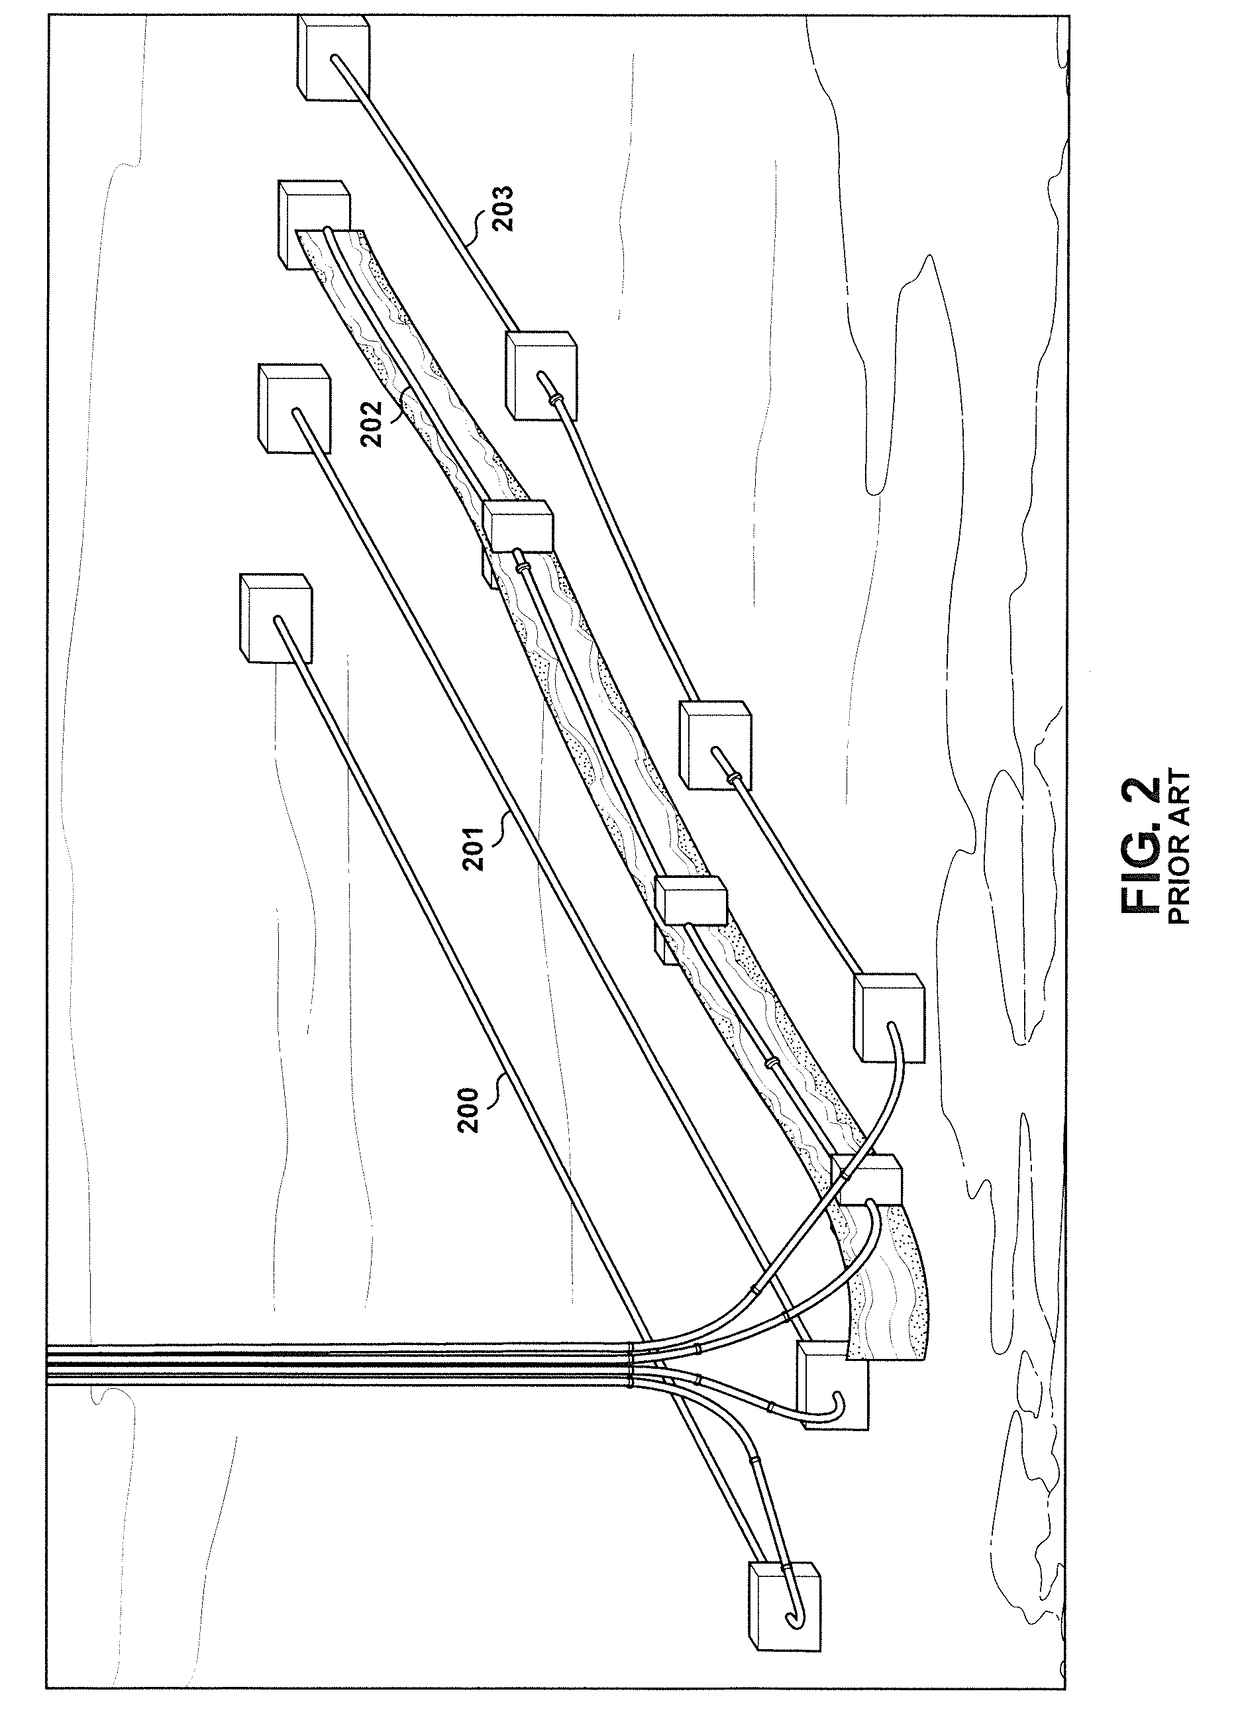 System and Method for Performing Distant Geophysical Survey